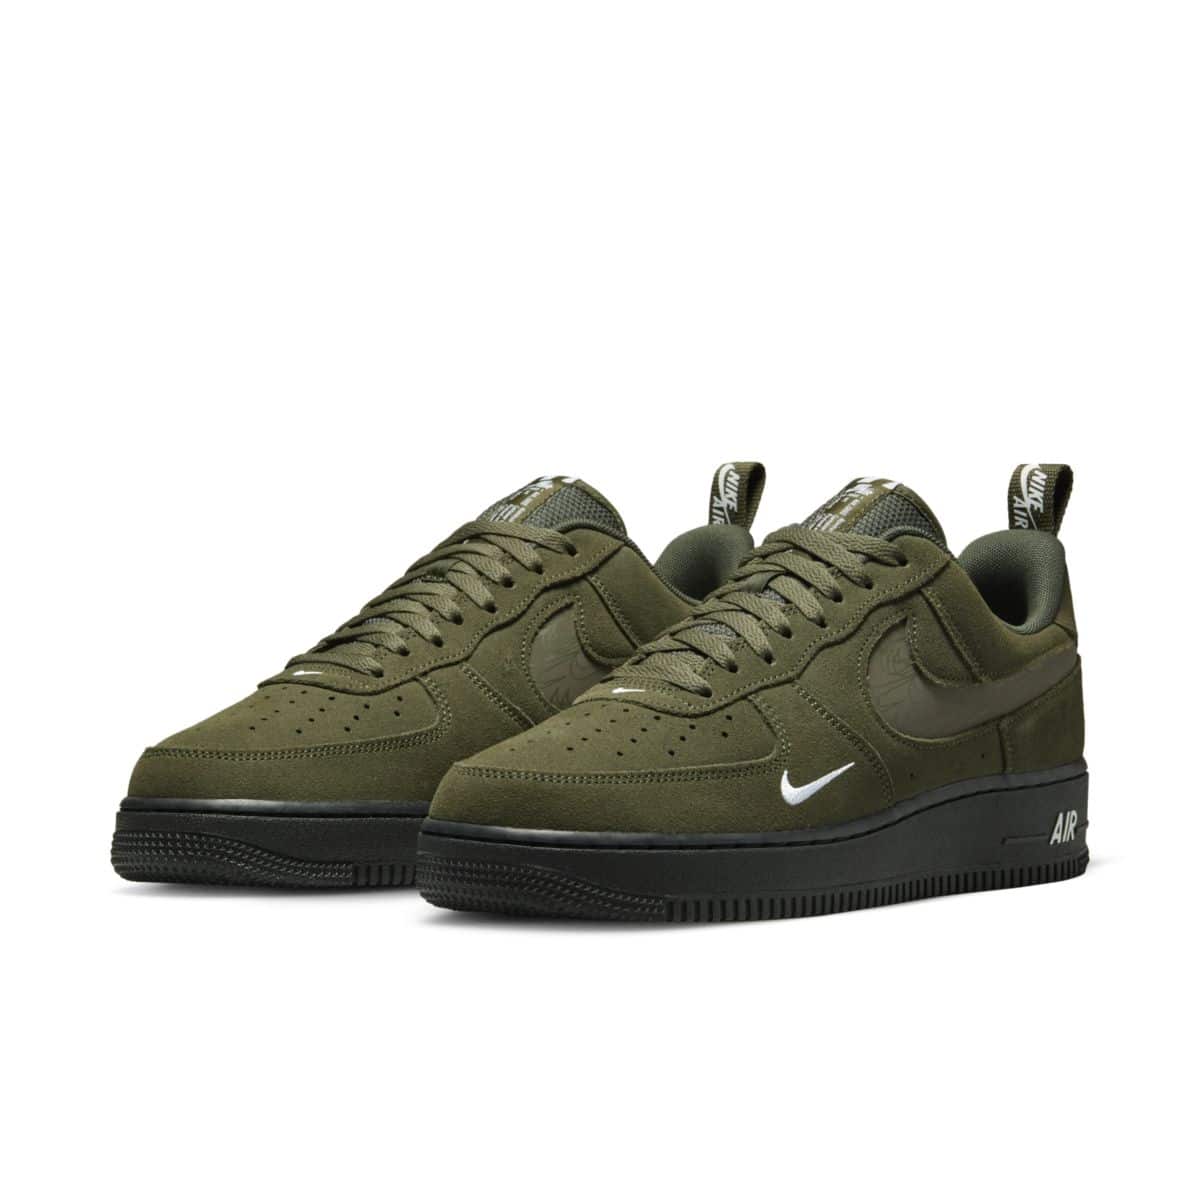 Nike Air Force 1 Low Olive Suede DZ4514-300 4